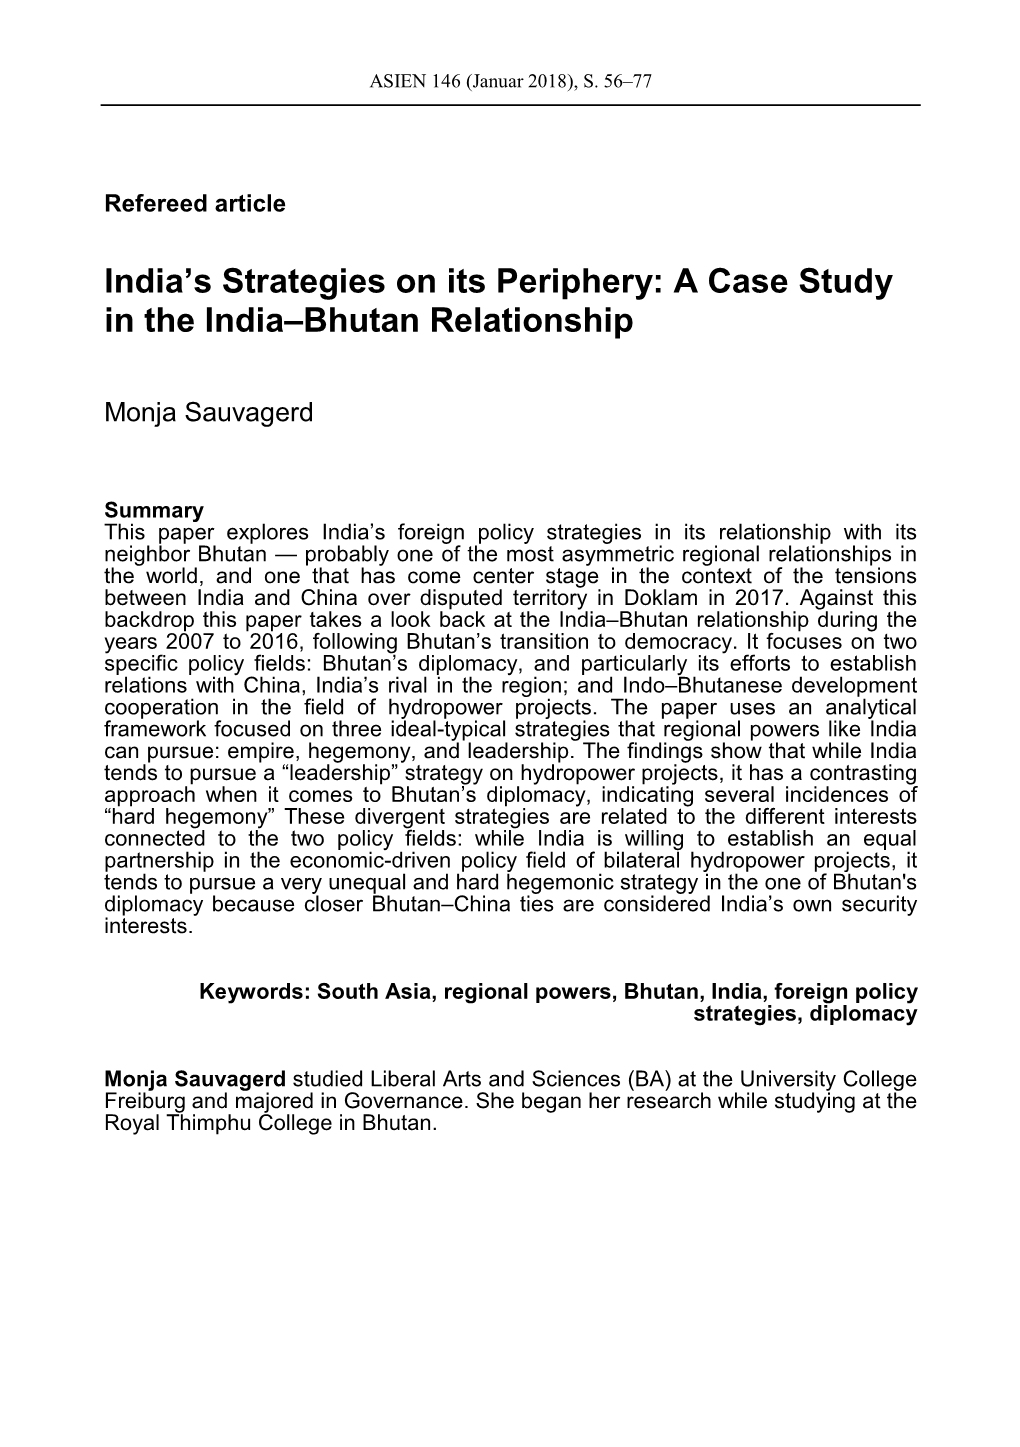 India's Strategies on Its Periphery: a Case Study in the India–Bhutan